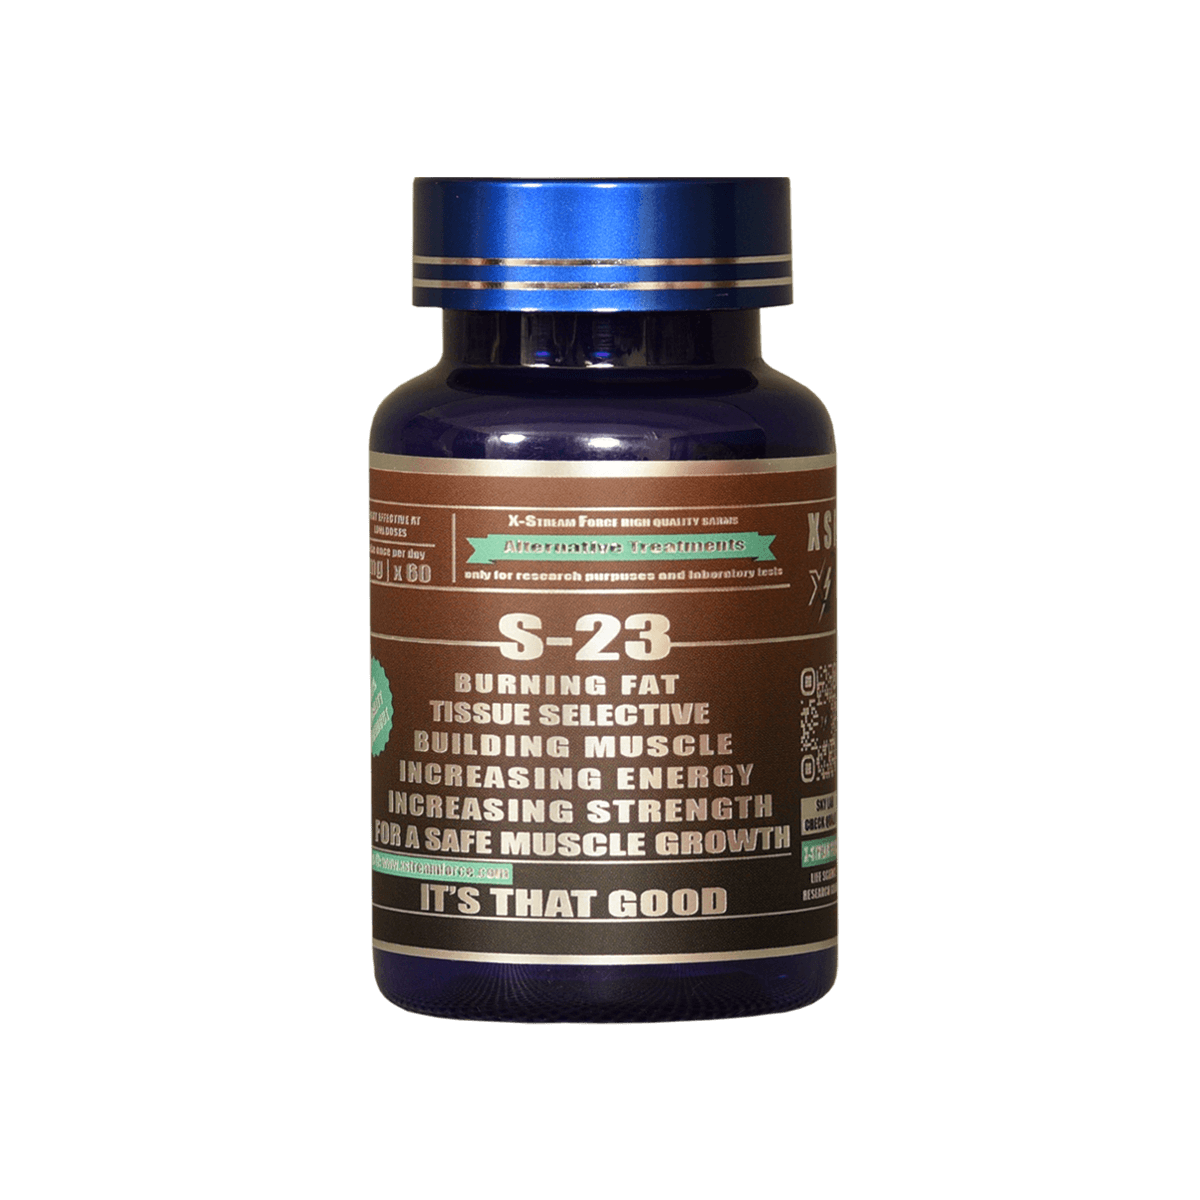 s23-capsules-60-10mg-muscle shop-xstreamforce-for recomp-strength, fat cleaner-mass | X-Stream Force